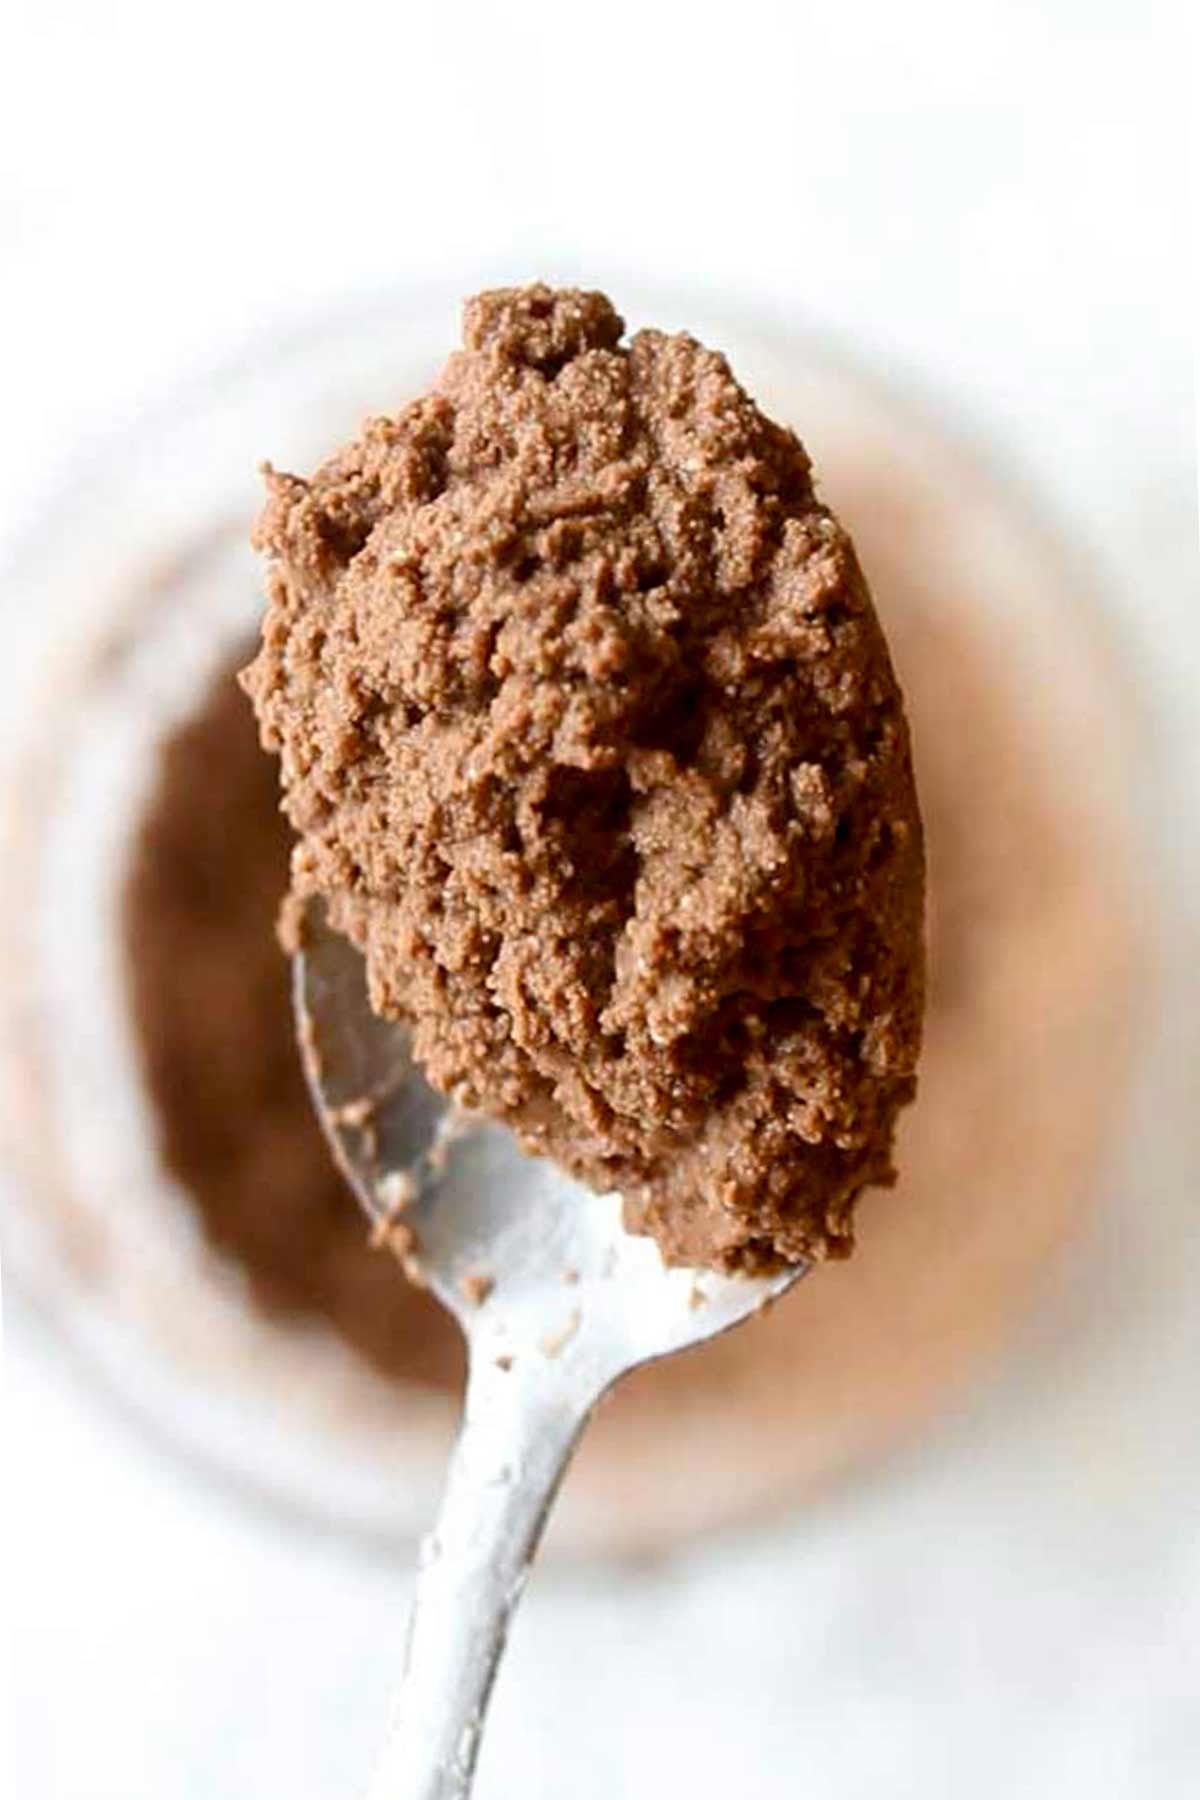 Spoonful Of Vegan Keto Chocolate Mousse On A Spoon